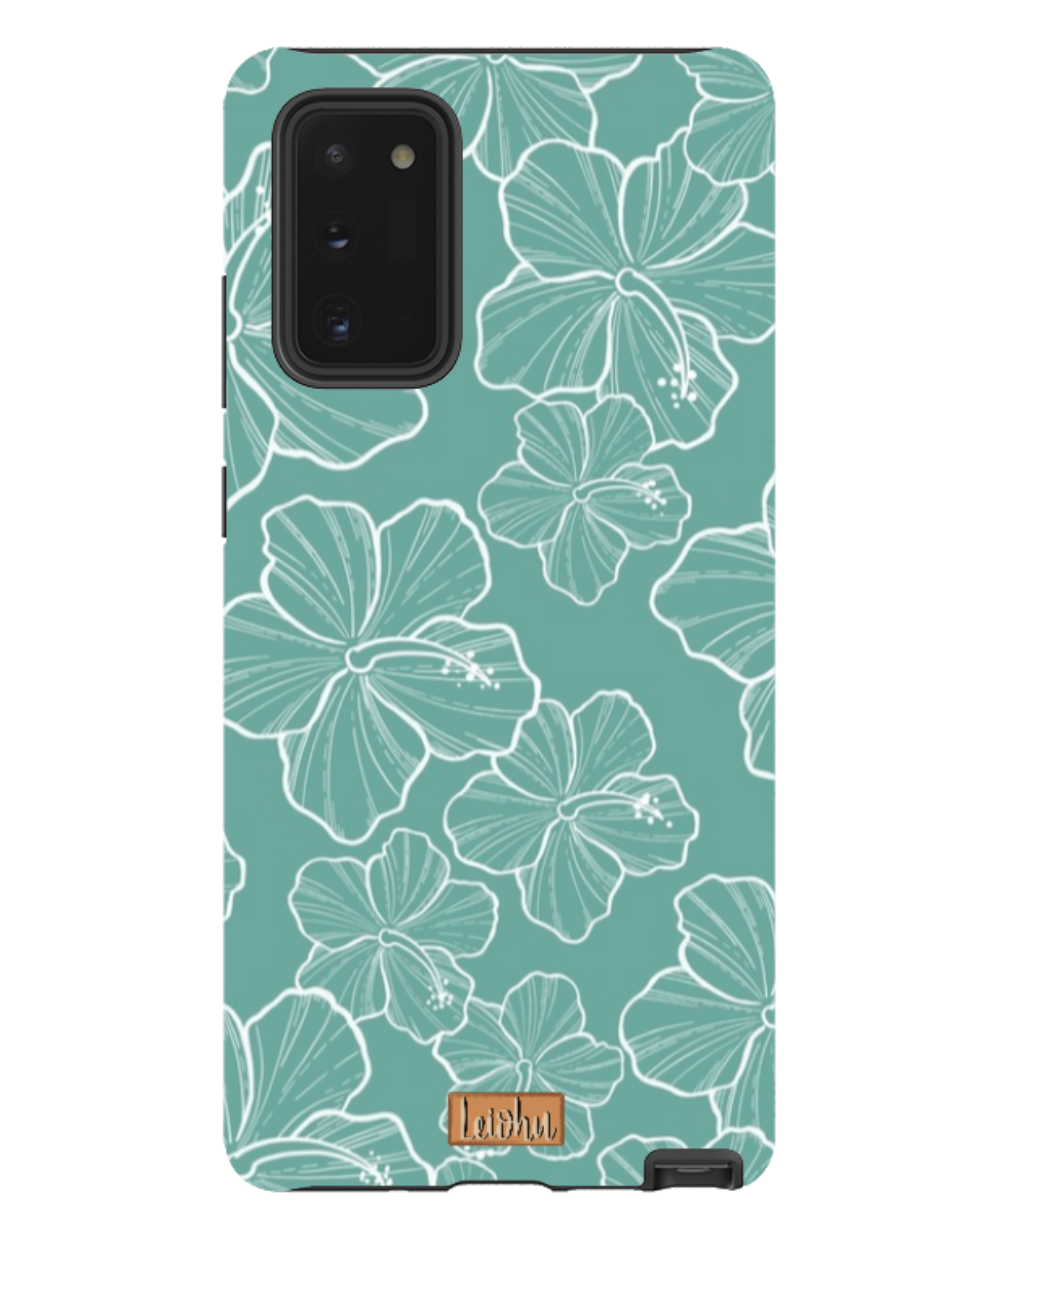 Hibiscus - Teal - Samsung Note